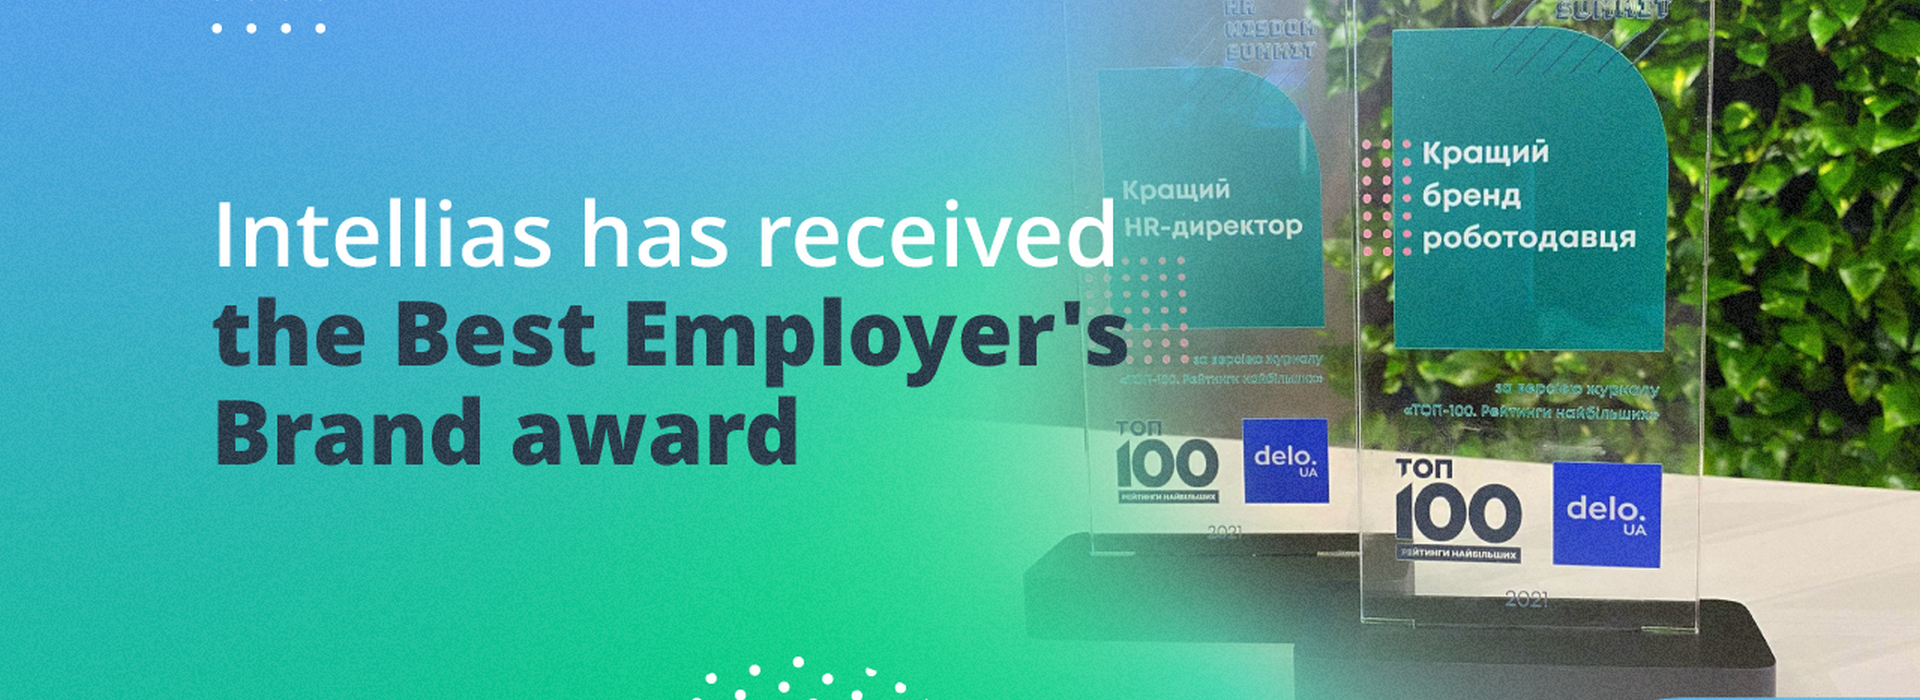 Intellias Received an Award for the Best Employer’s Brand